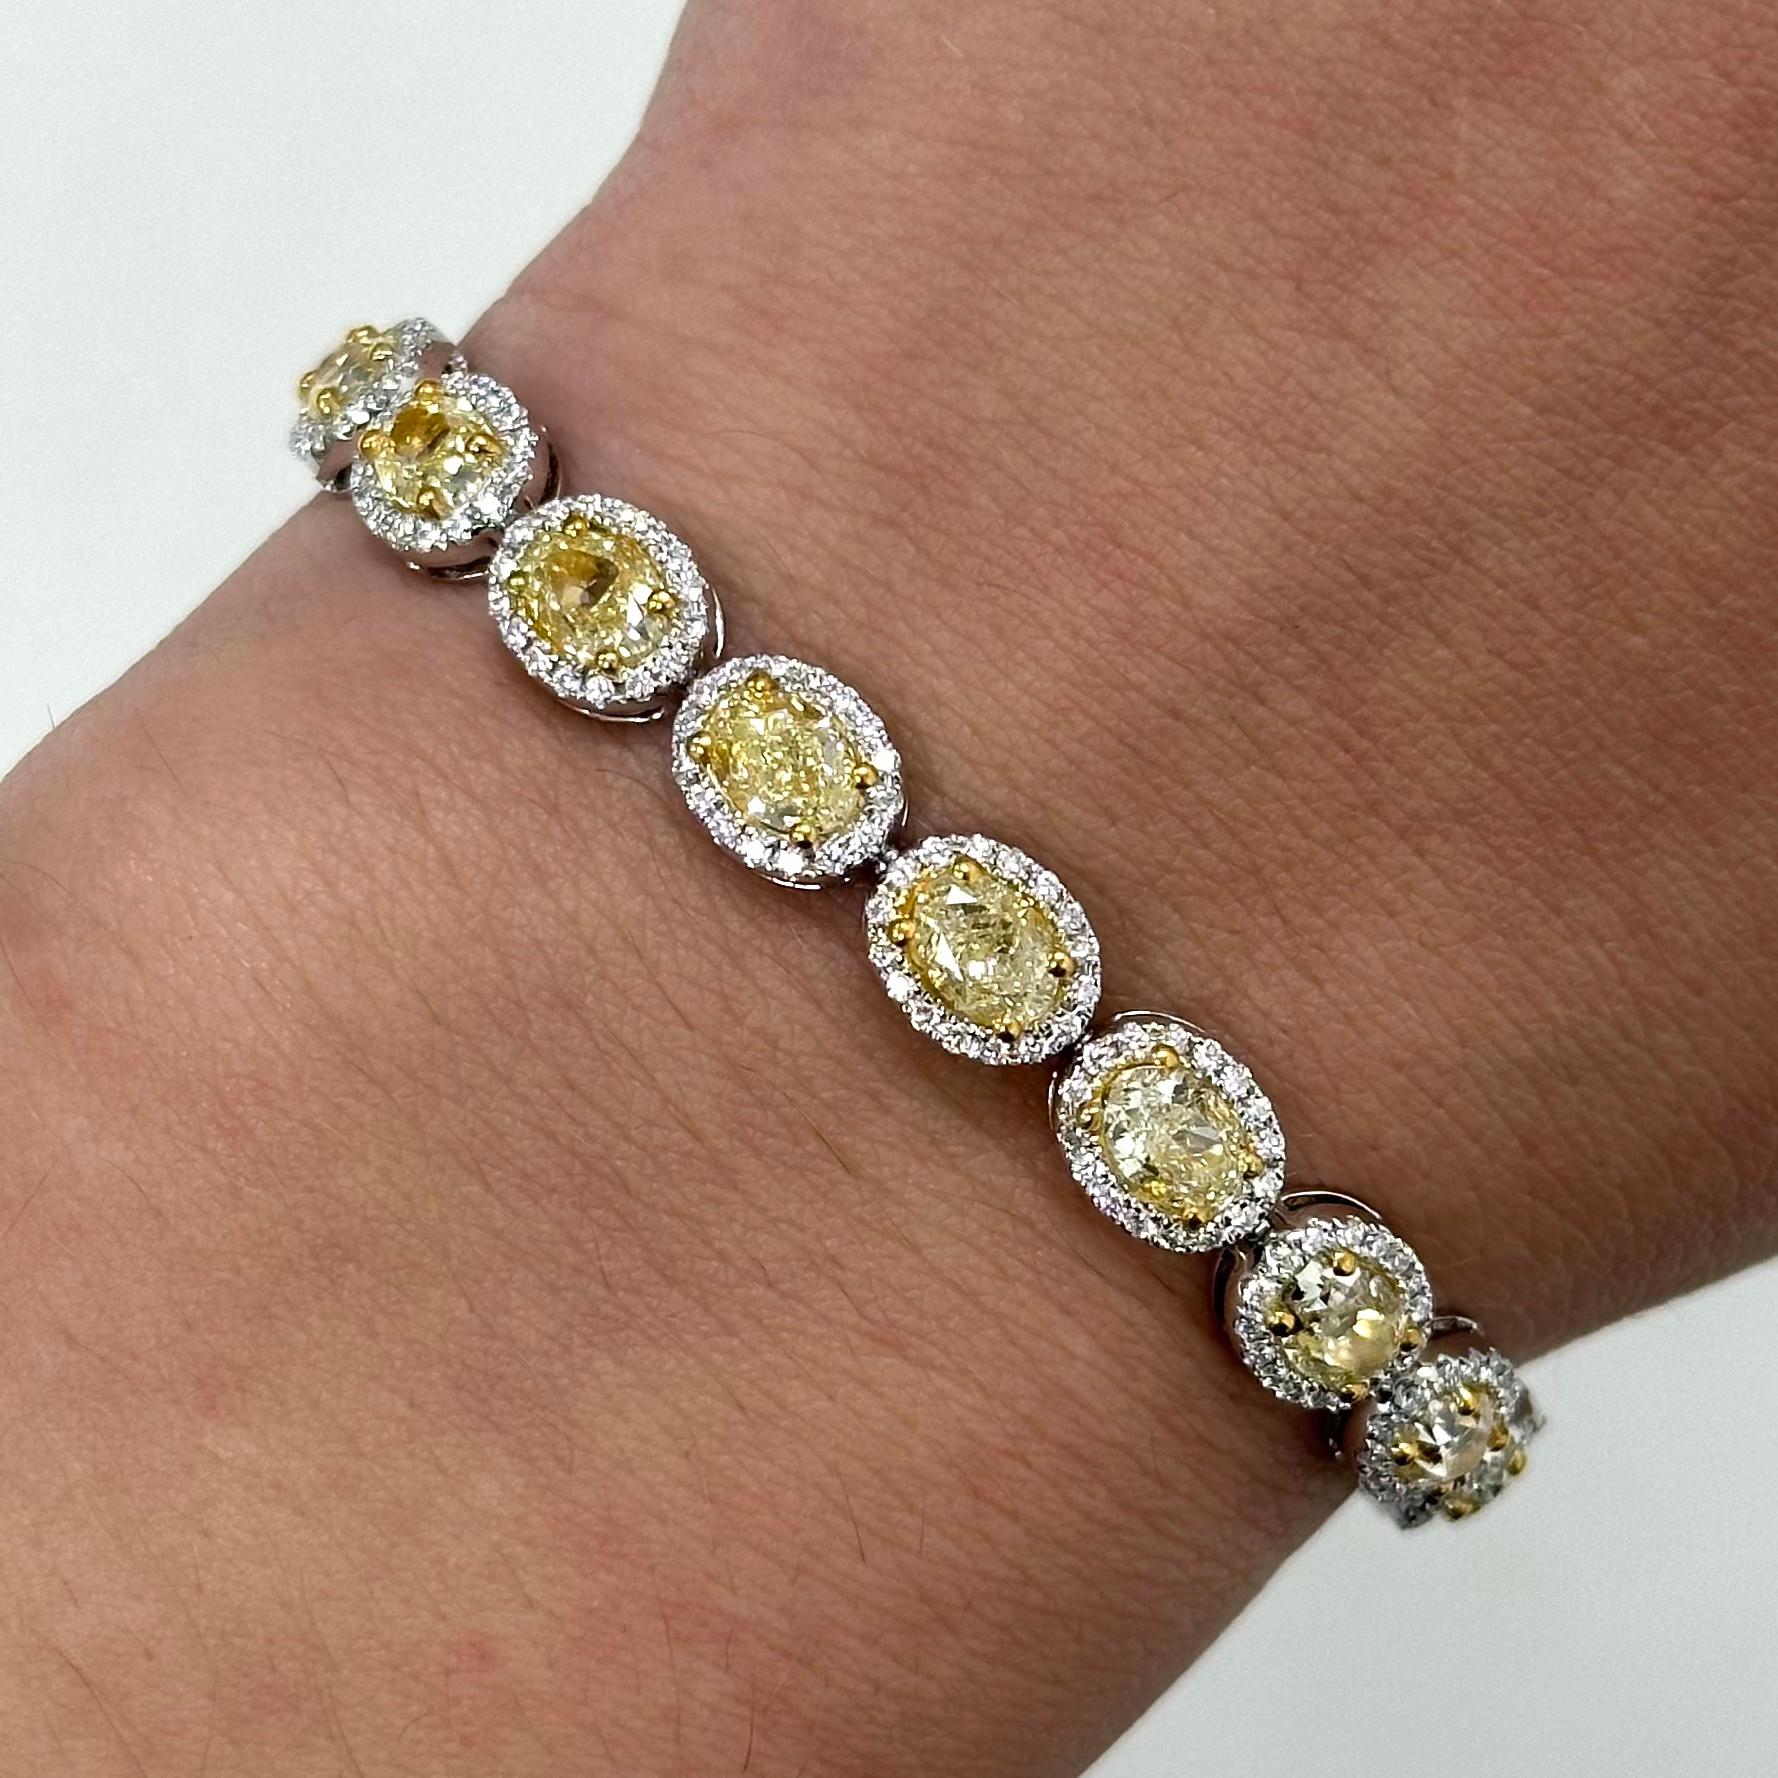 Stunning yellow oval diamond bracelet in 18k two tone gold, high jewelry by Alexander Beverly Hills.
11.14 carats total diamond weight.
22 oval diamonds, 9.81 carats. Approximately Fancy/Fancy Light Yellow color and VS clarity. Complimented by 352